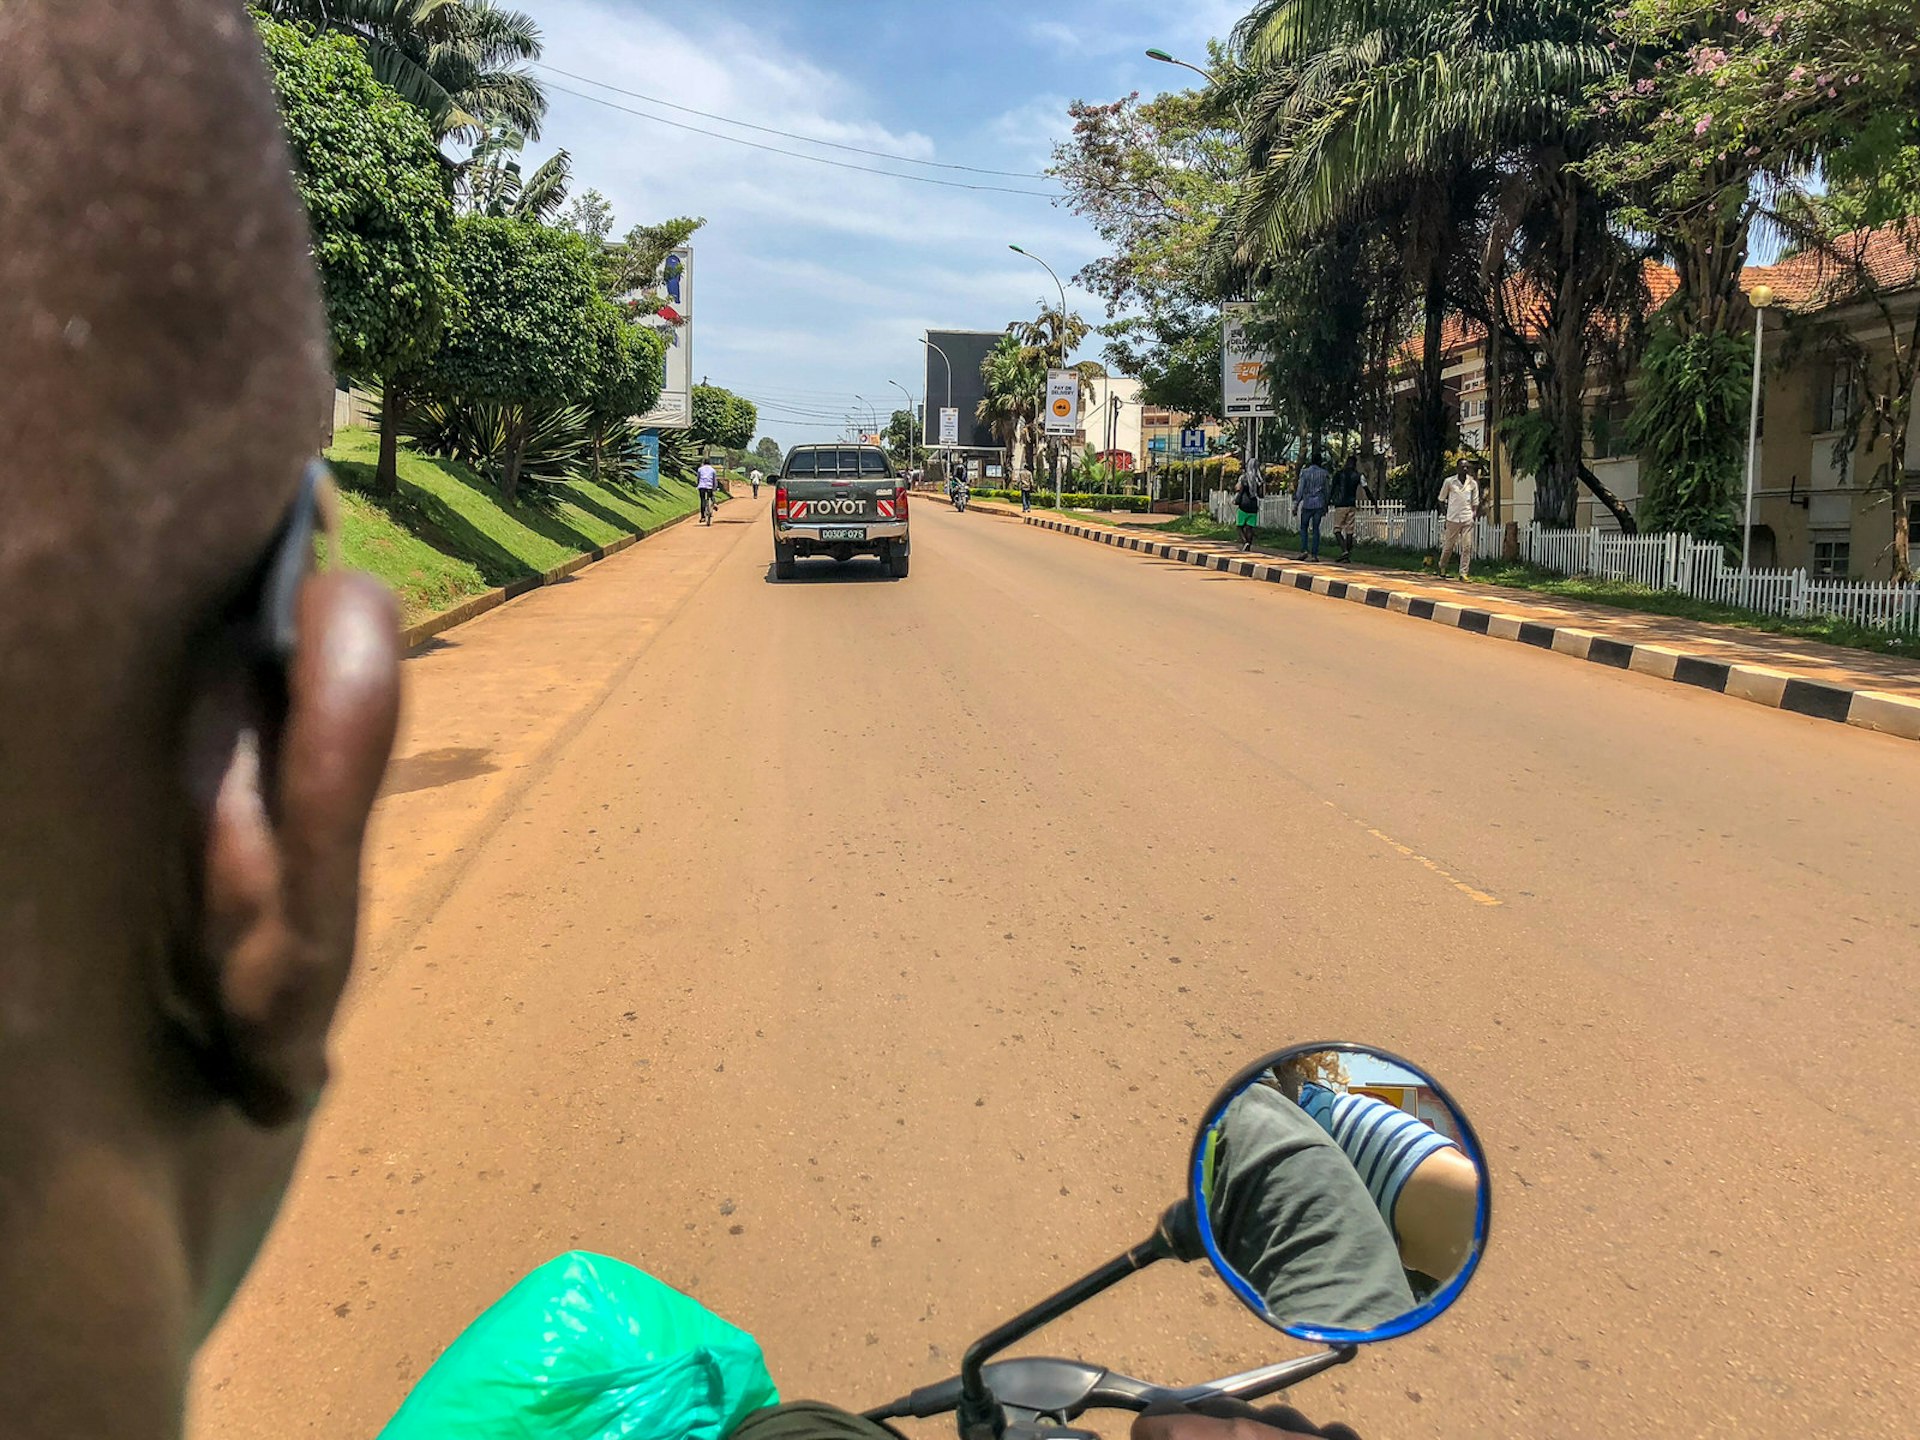 The right-hand side of the head of the motorcycle taxi (boda boda) driver is visible on the left side of the image; straight ahead is the sideview mirror and the paved road ahead